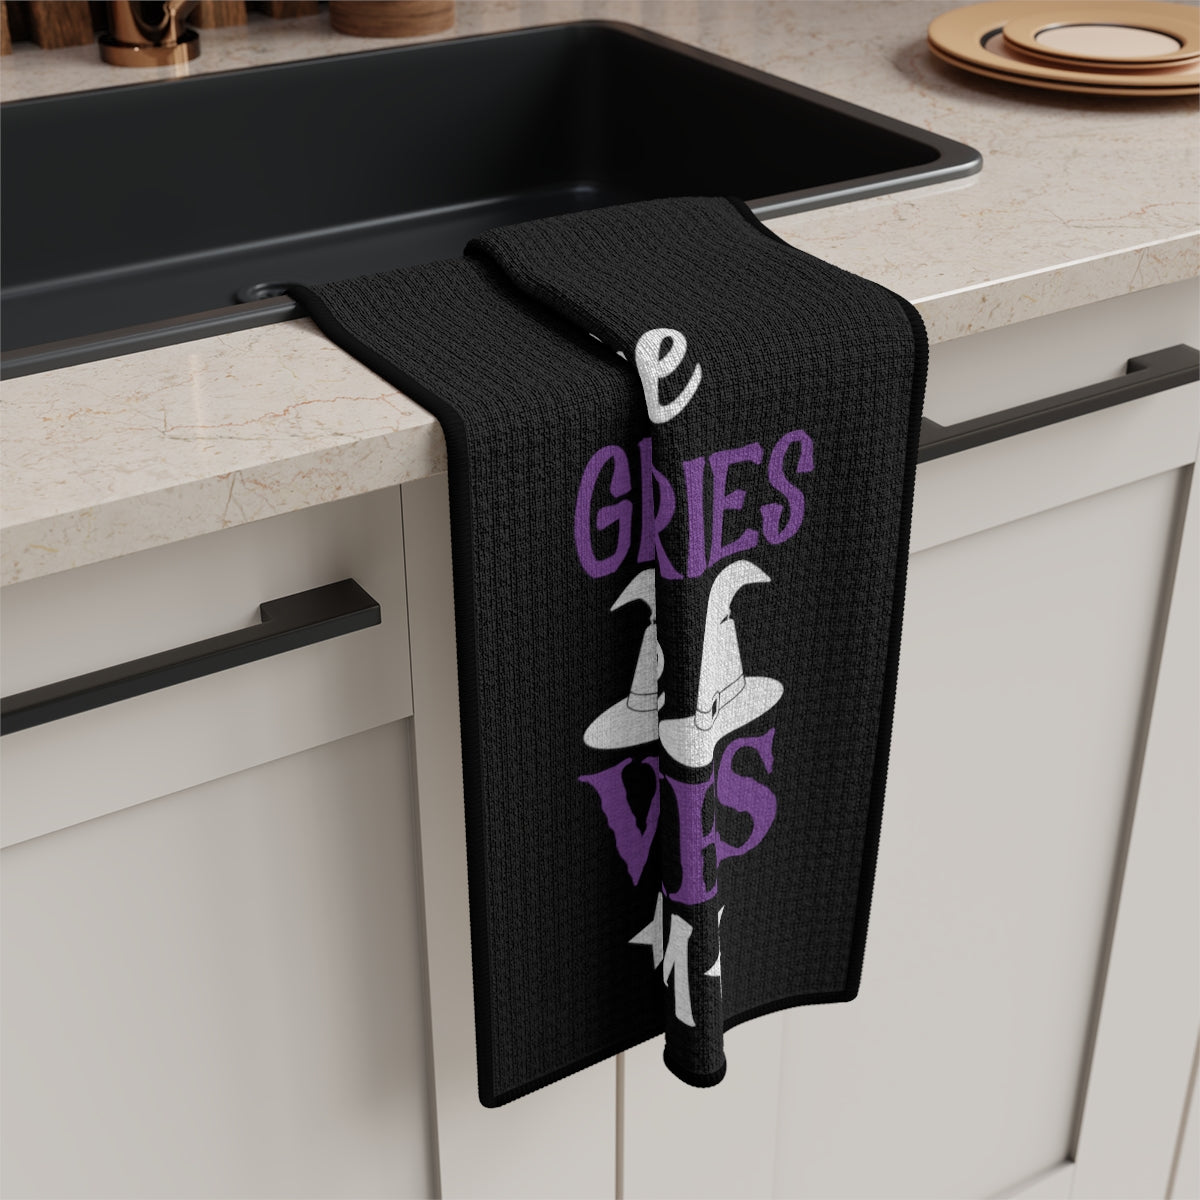 All The Great Stories Tea Towel - Witchy Kitchens